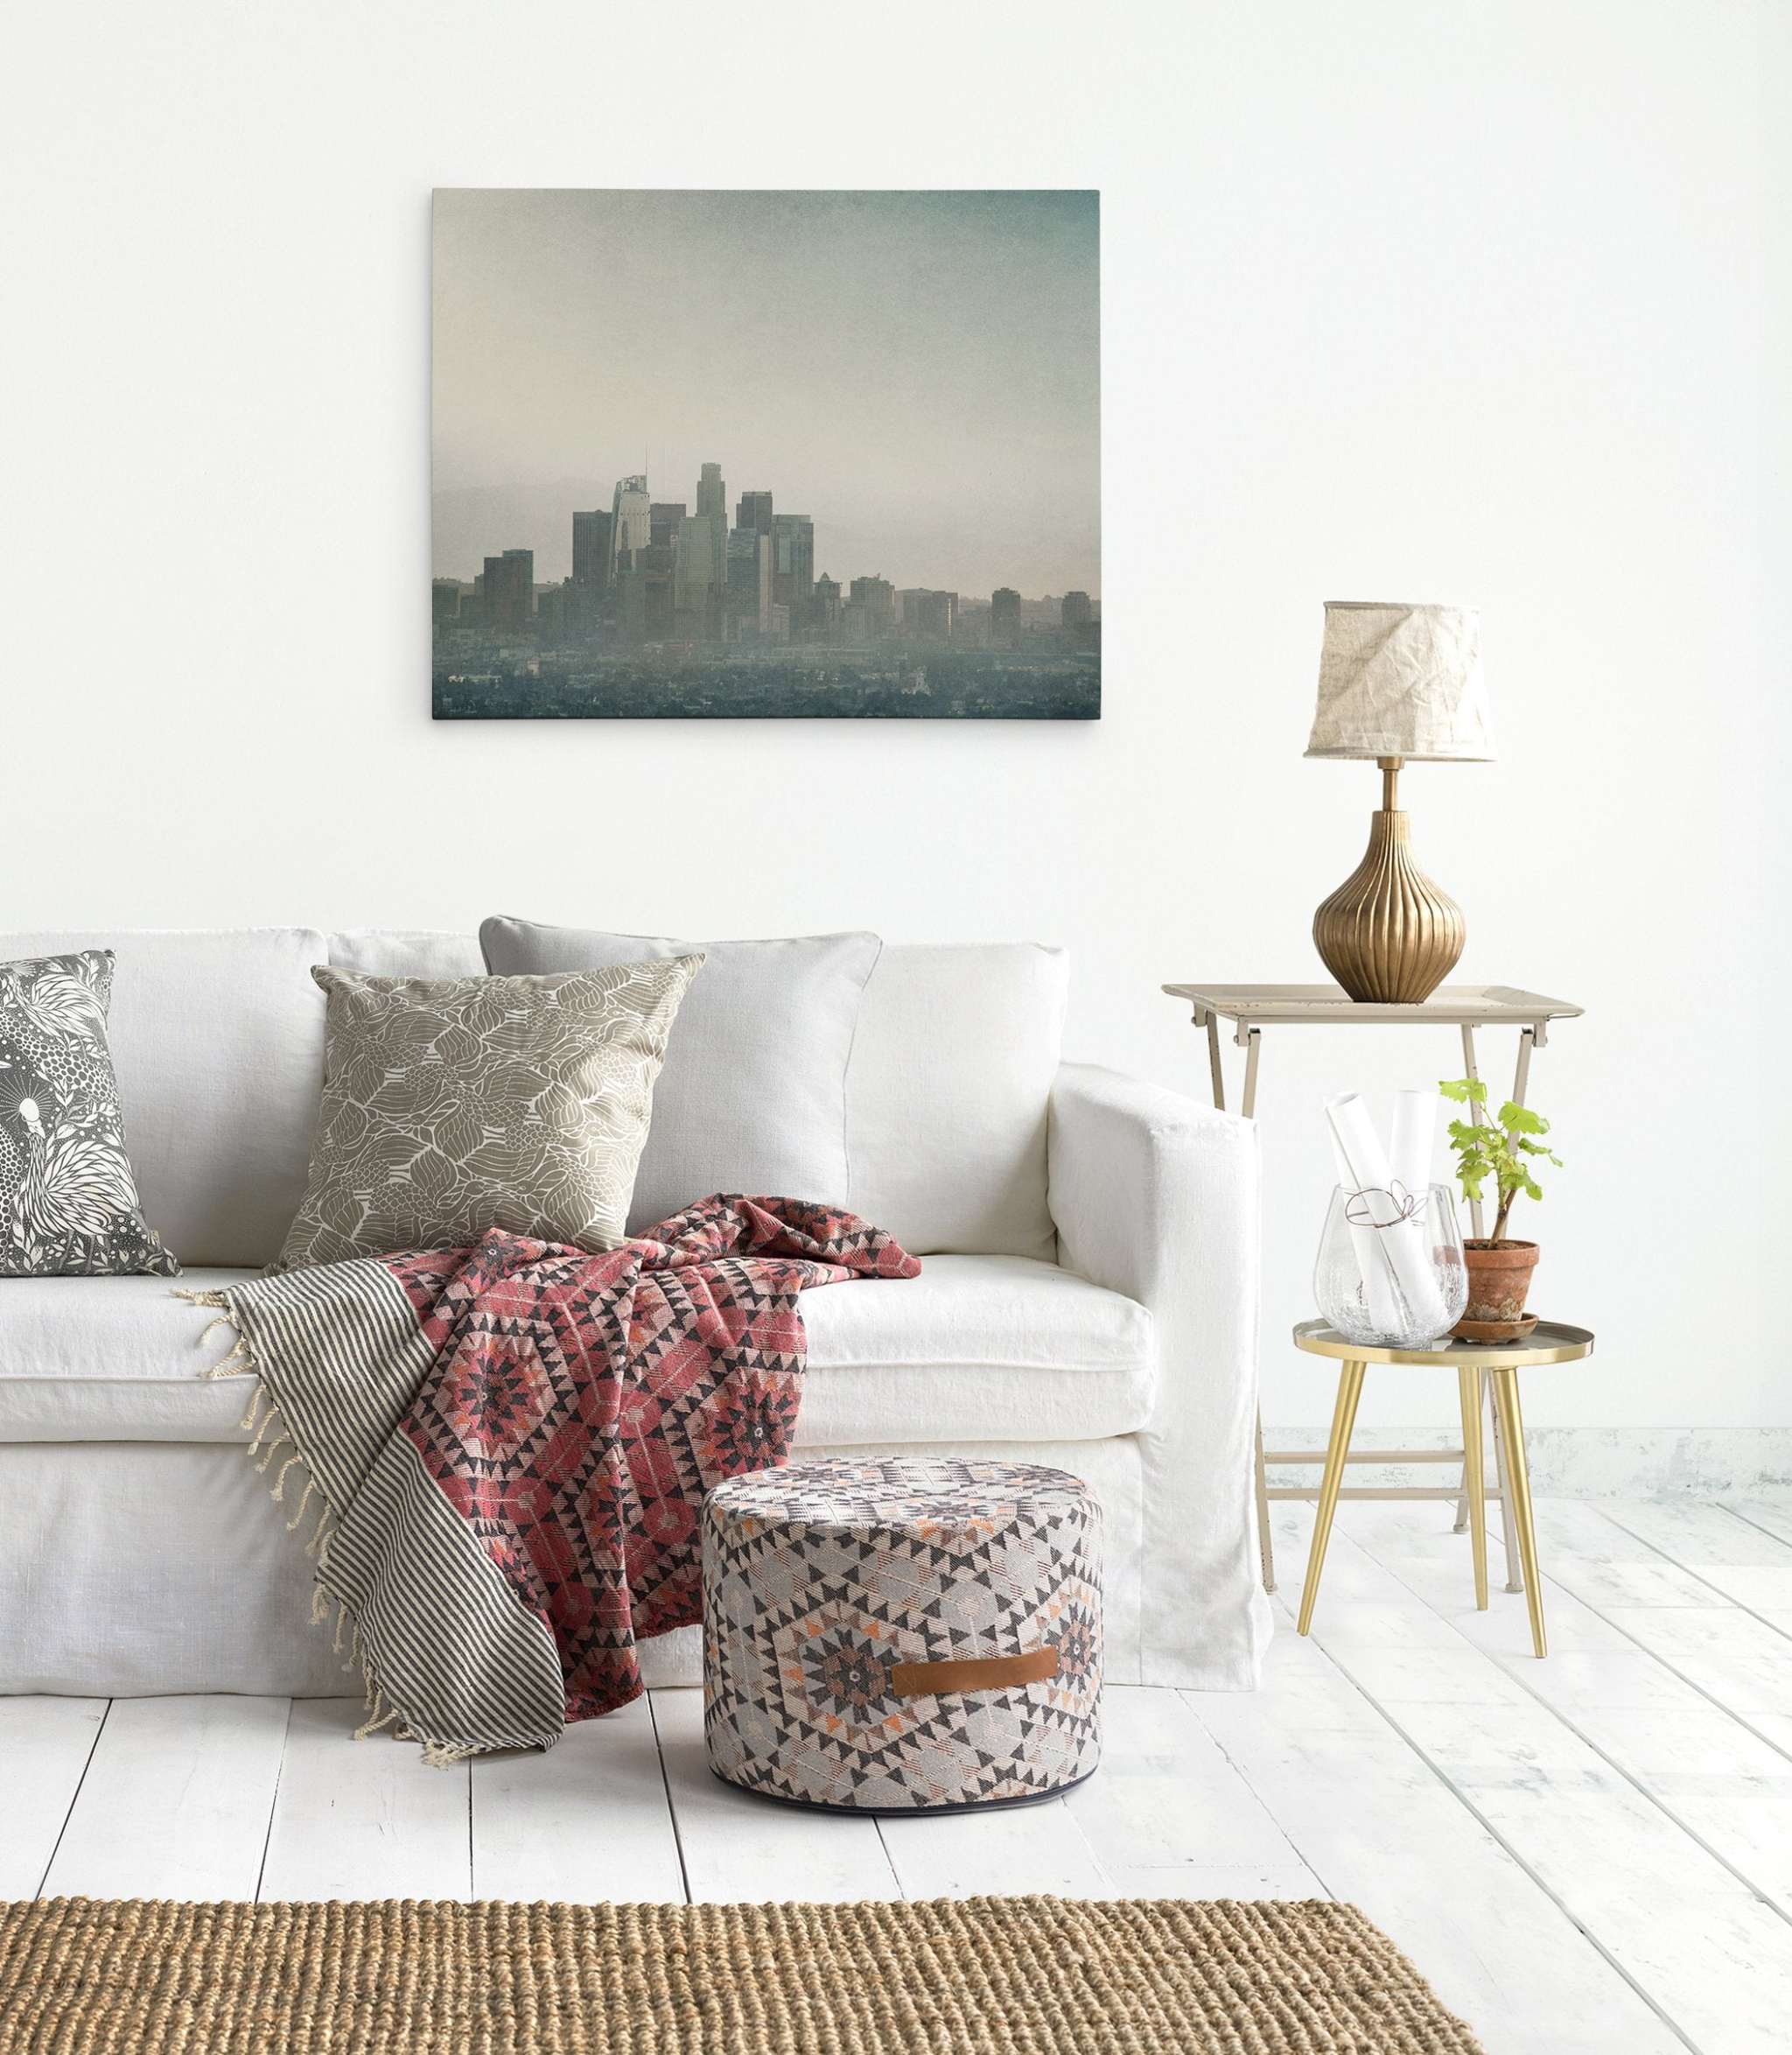 A cozy living room features a white sofa adorned with patterned cushions and a red geometric throw. A patterned pouf sits in front of the sofa. A small side table holding a lamp and a plant is placed next to it. Hanging on the wall is 'Stormy La La Land' Downtown Los Angeles Canvas Wall Art by Offley Green.